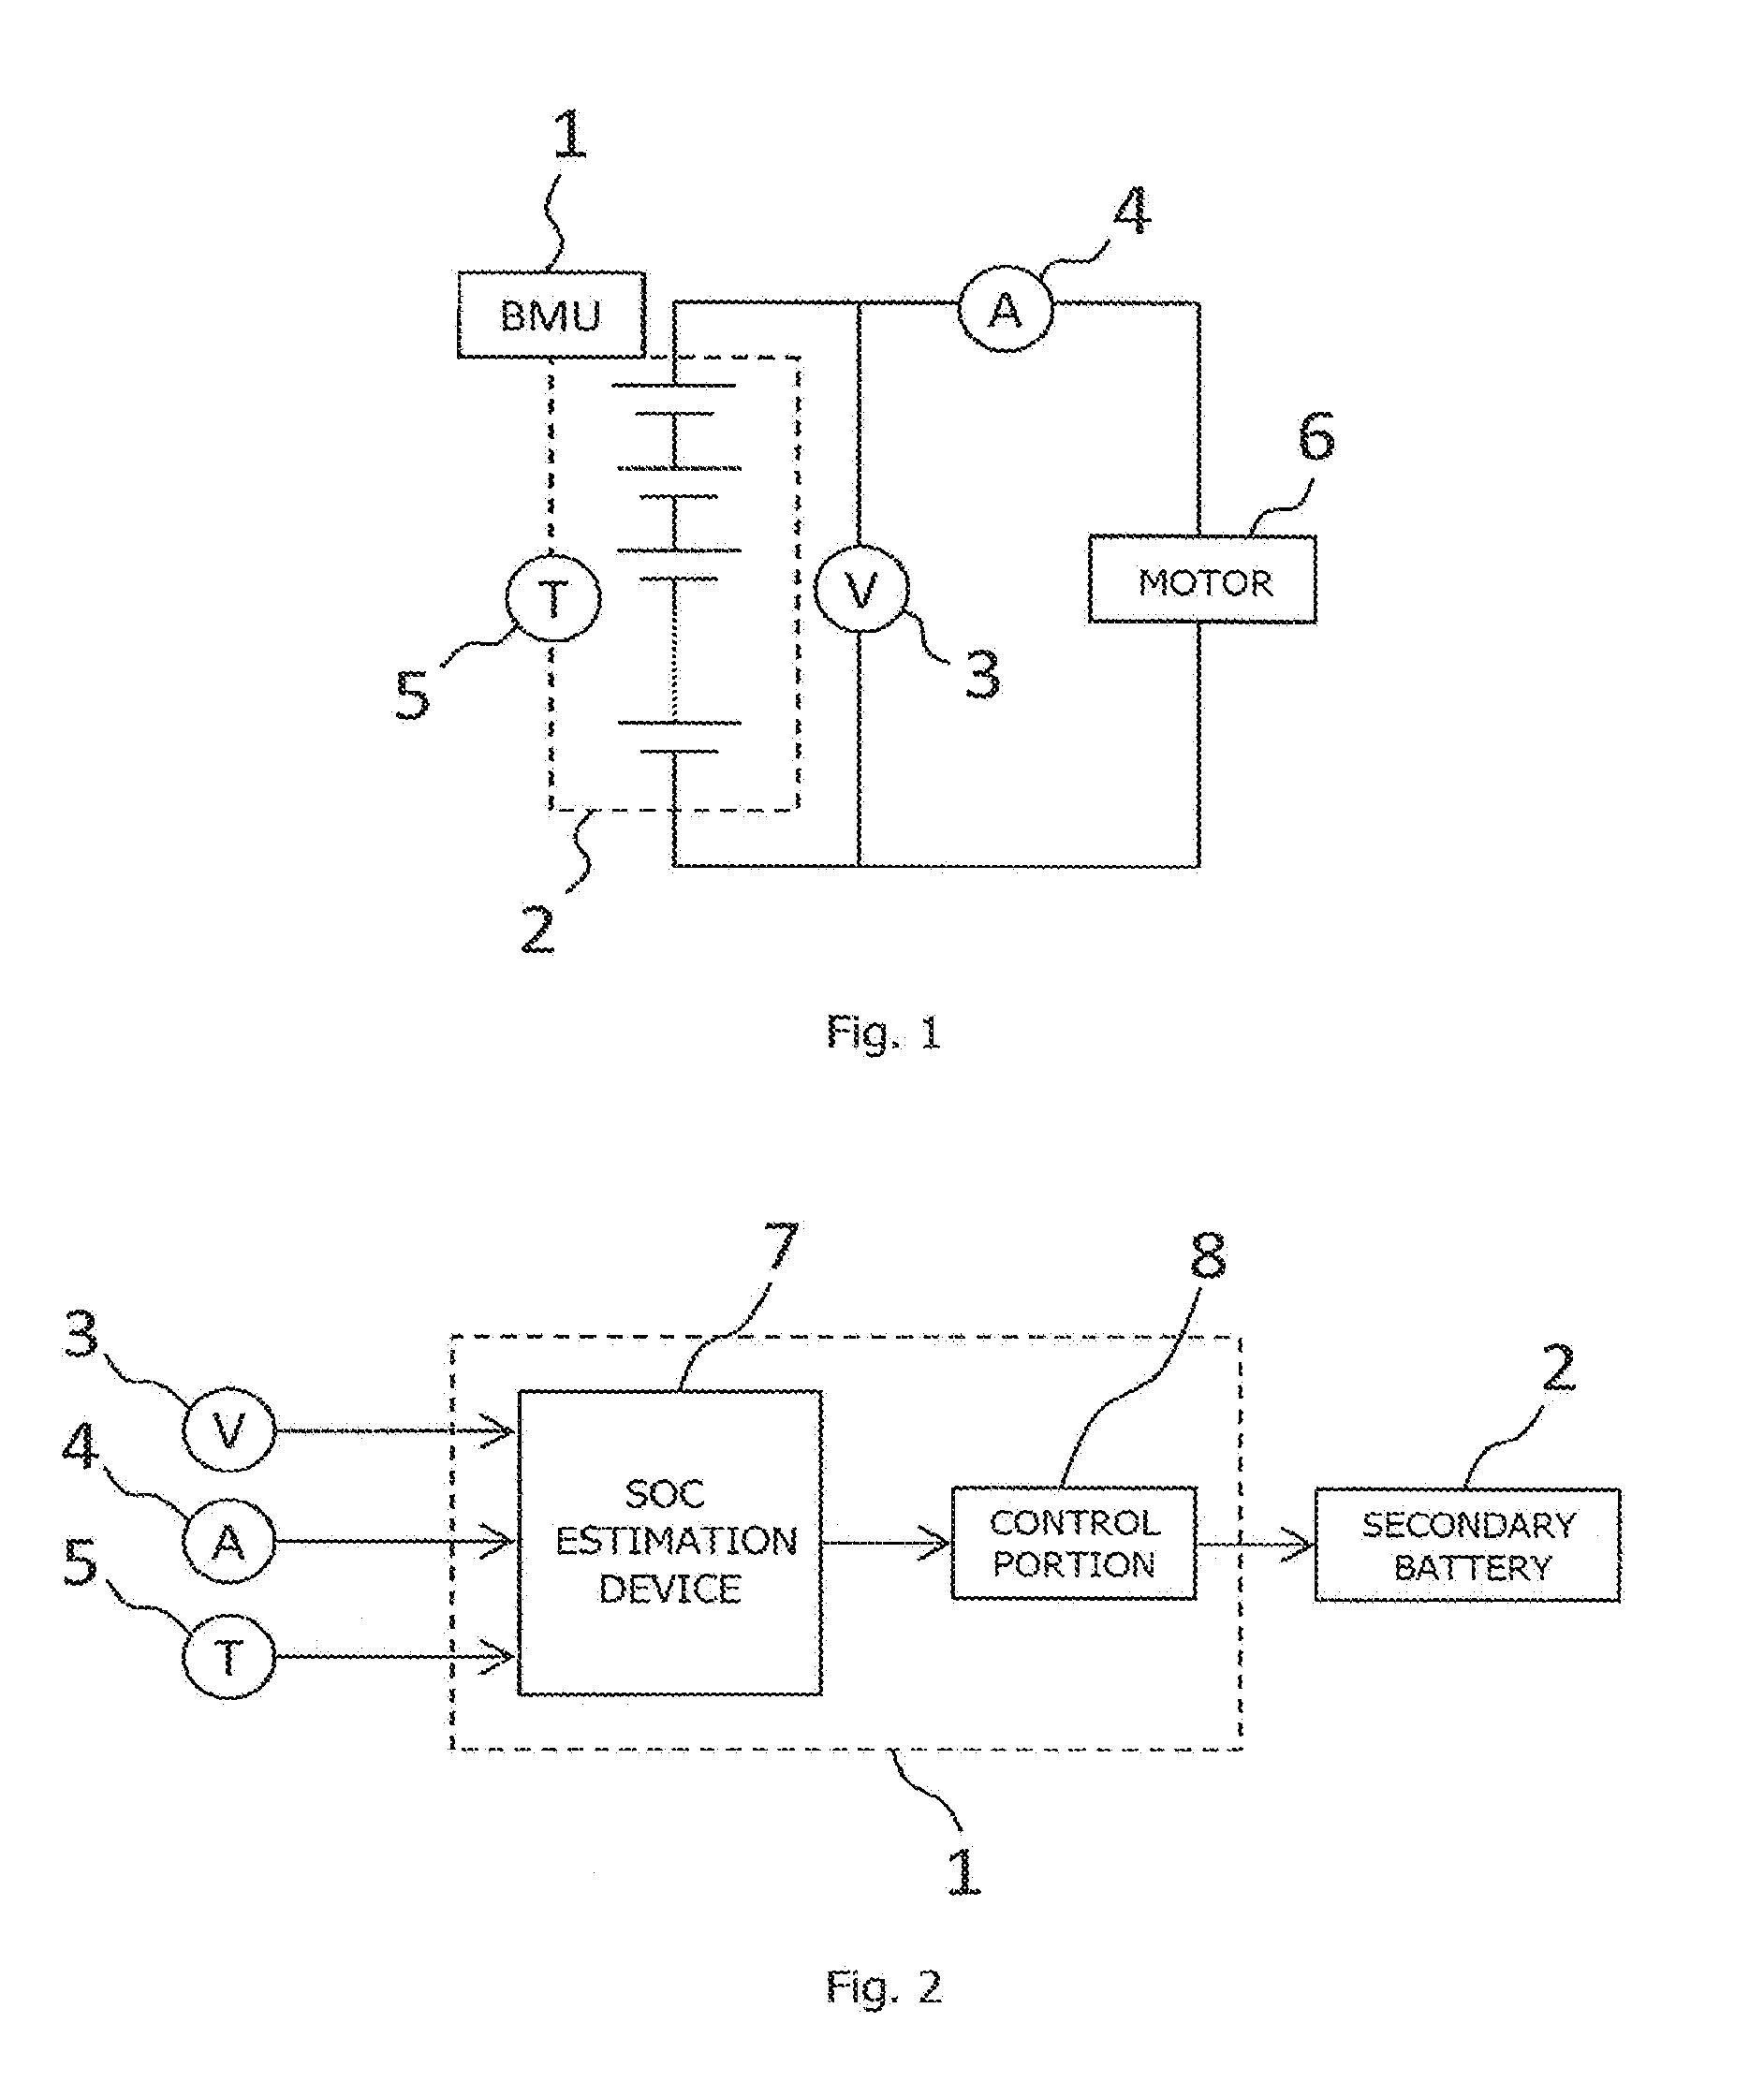 Soc estimation device for secondary battery